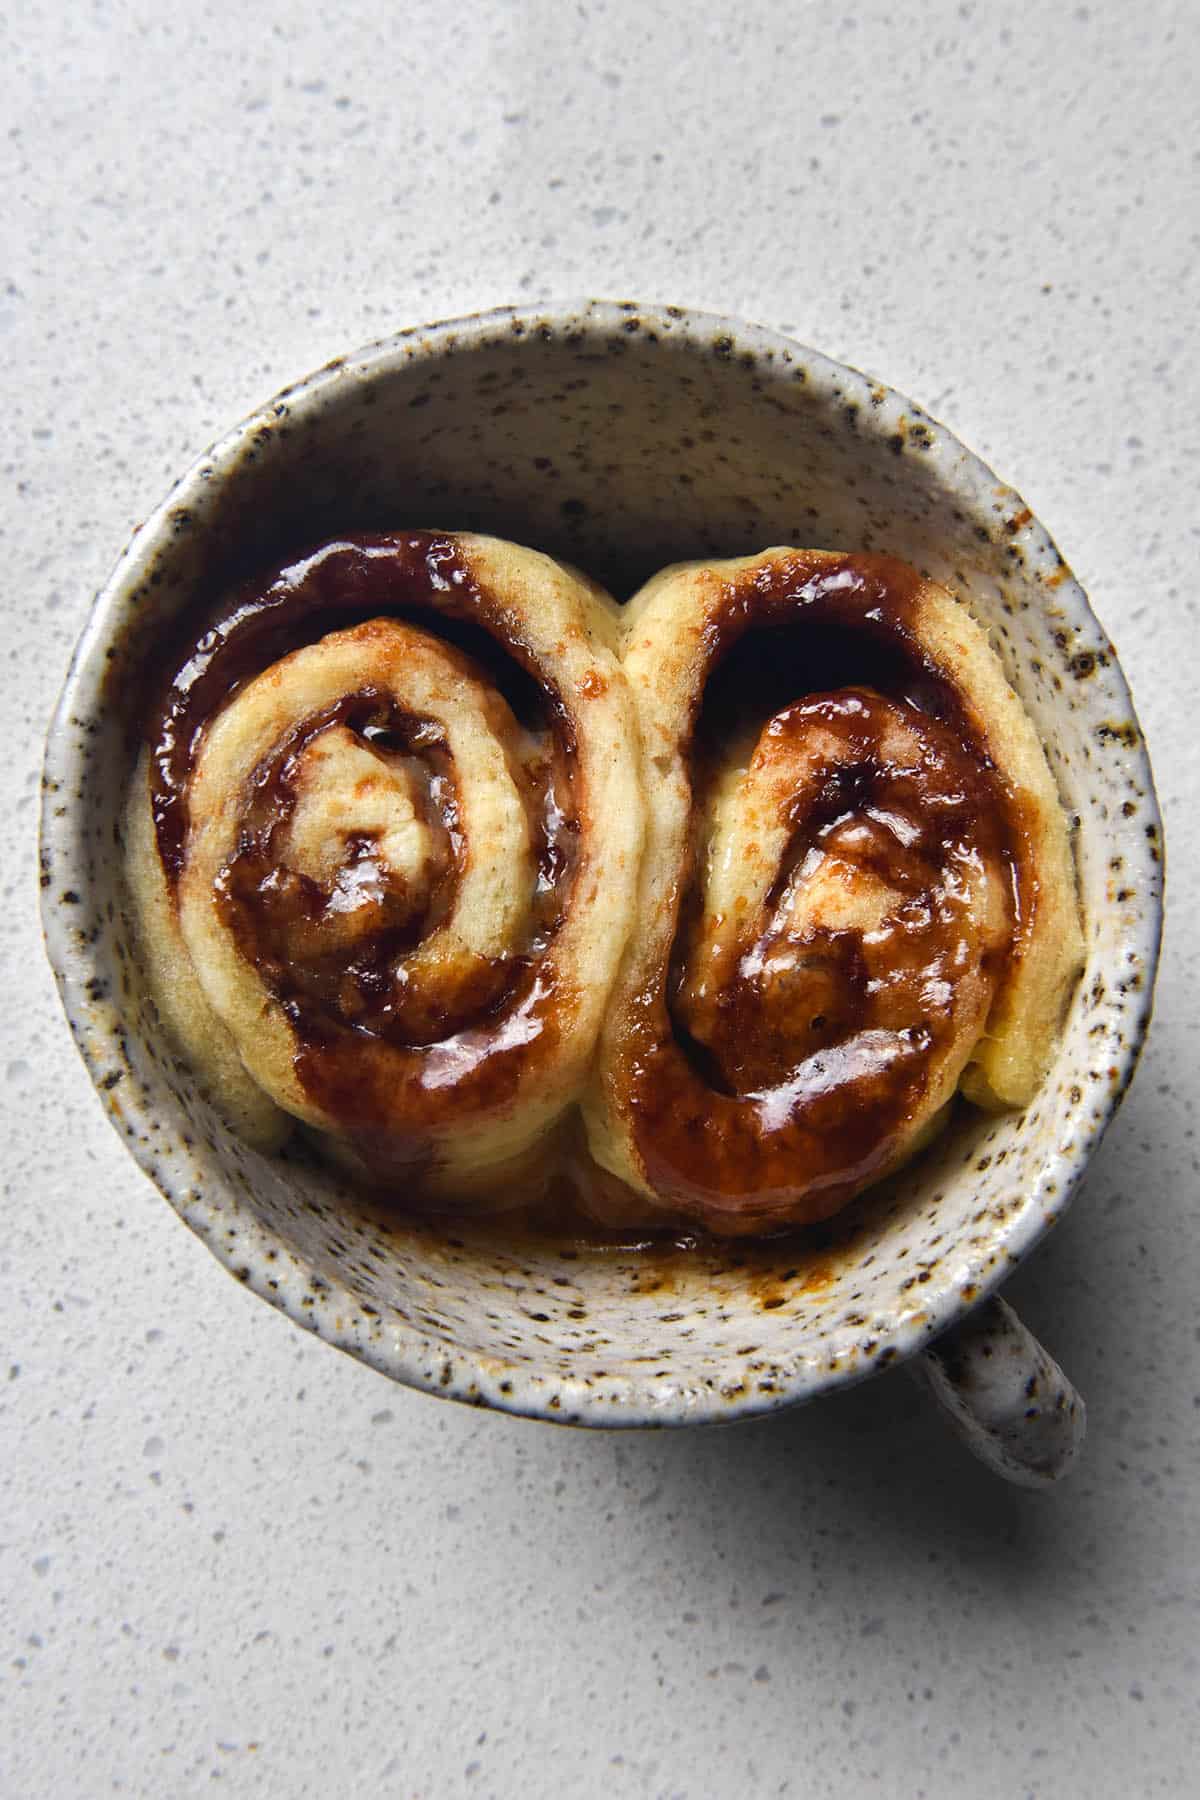 An aerial view of a gluten free Vegemite scroll made in a mug. The mug is a white speckled ceramic one that sits atop a white kitchen counter. The single serve scroll was sliced into two before baking, leaving two oozy, melty, cheesy scrolls snuggled up against eachother in the mug